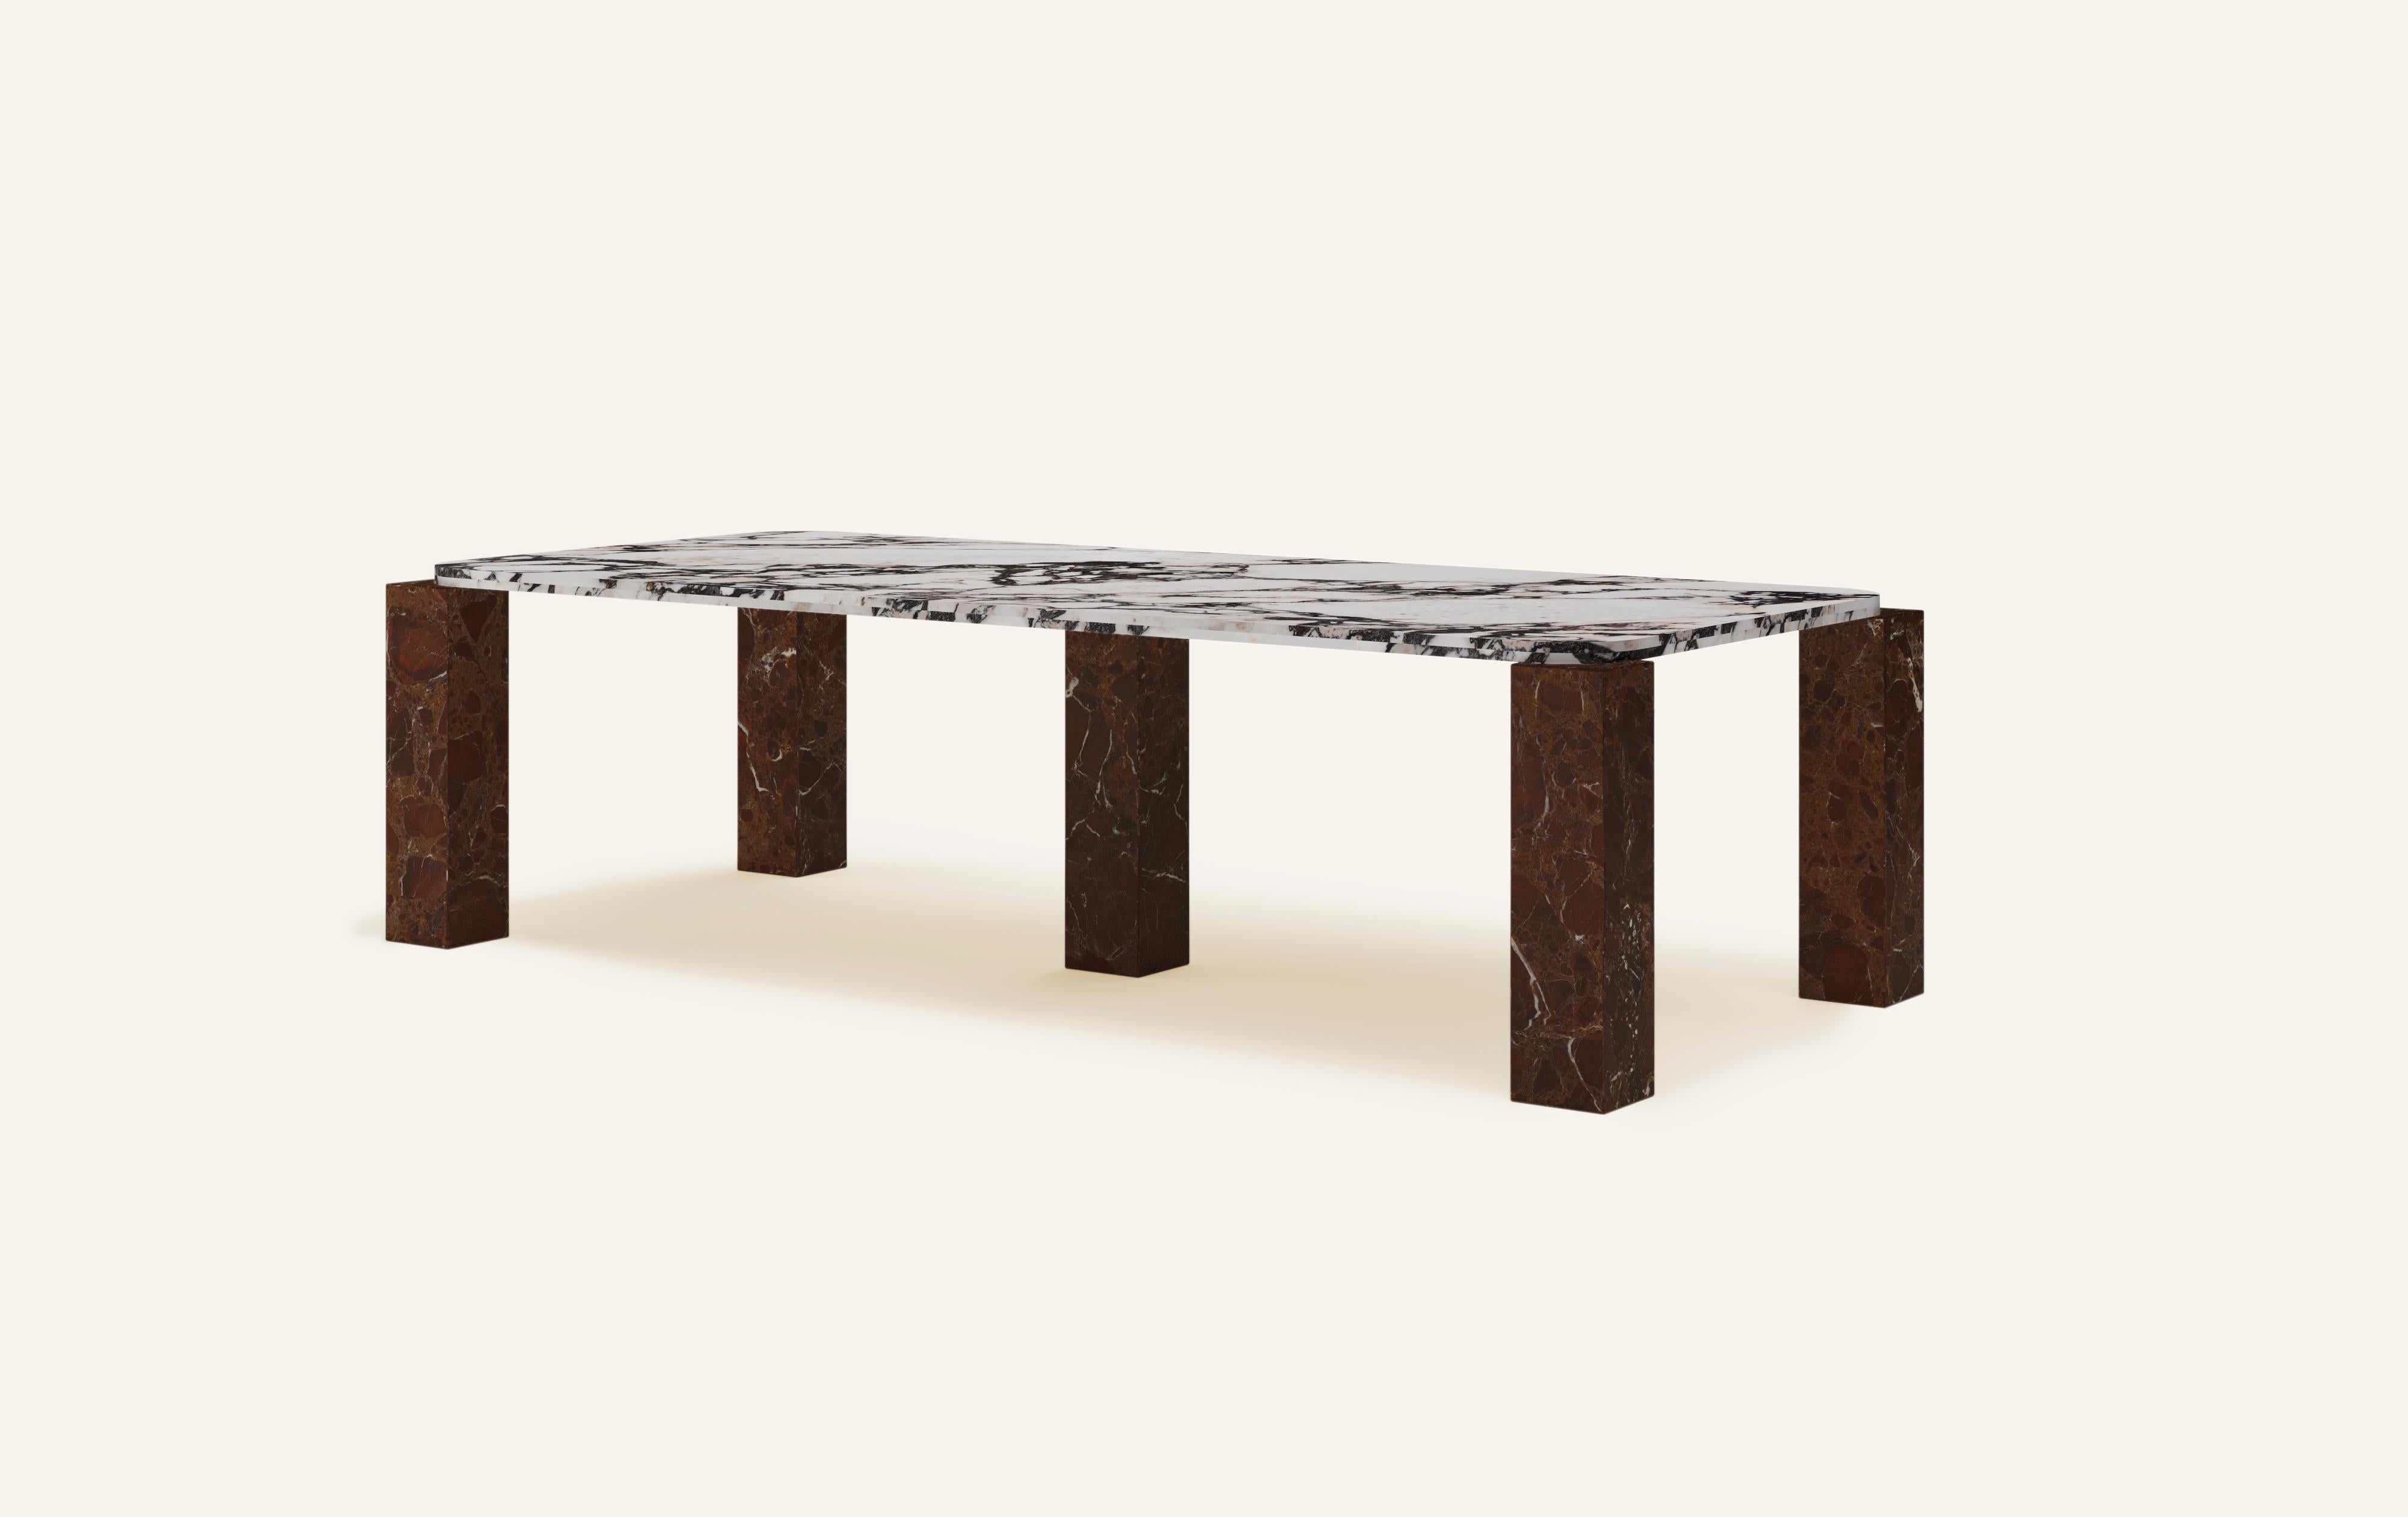 Organic Modern FORM(LA) Cubo Rectangle Dining Table 86”L x 44”W x 30”H Viola & Rosso Marble For Sale